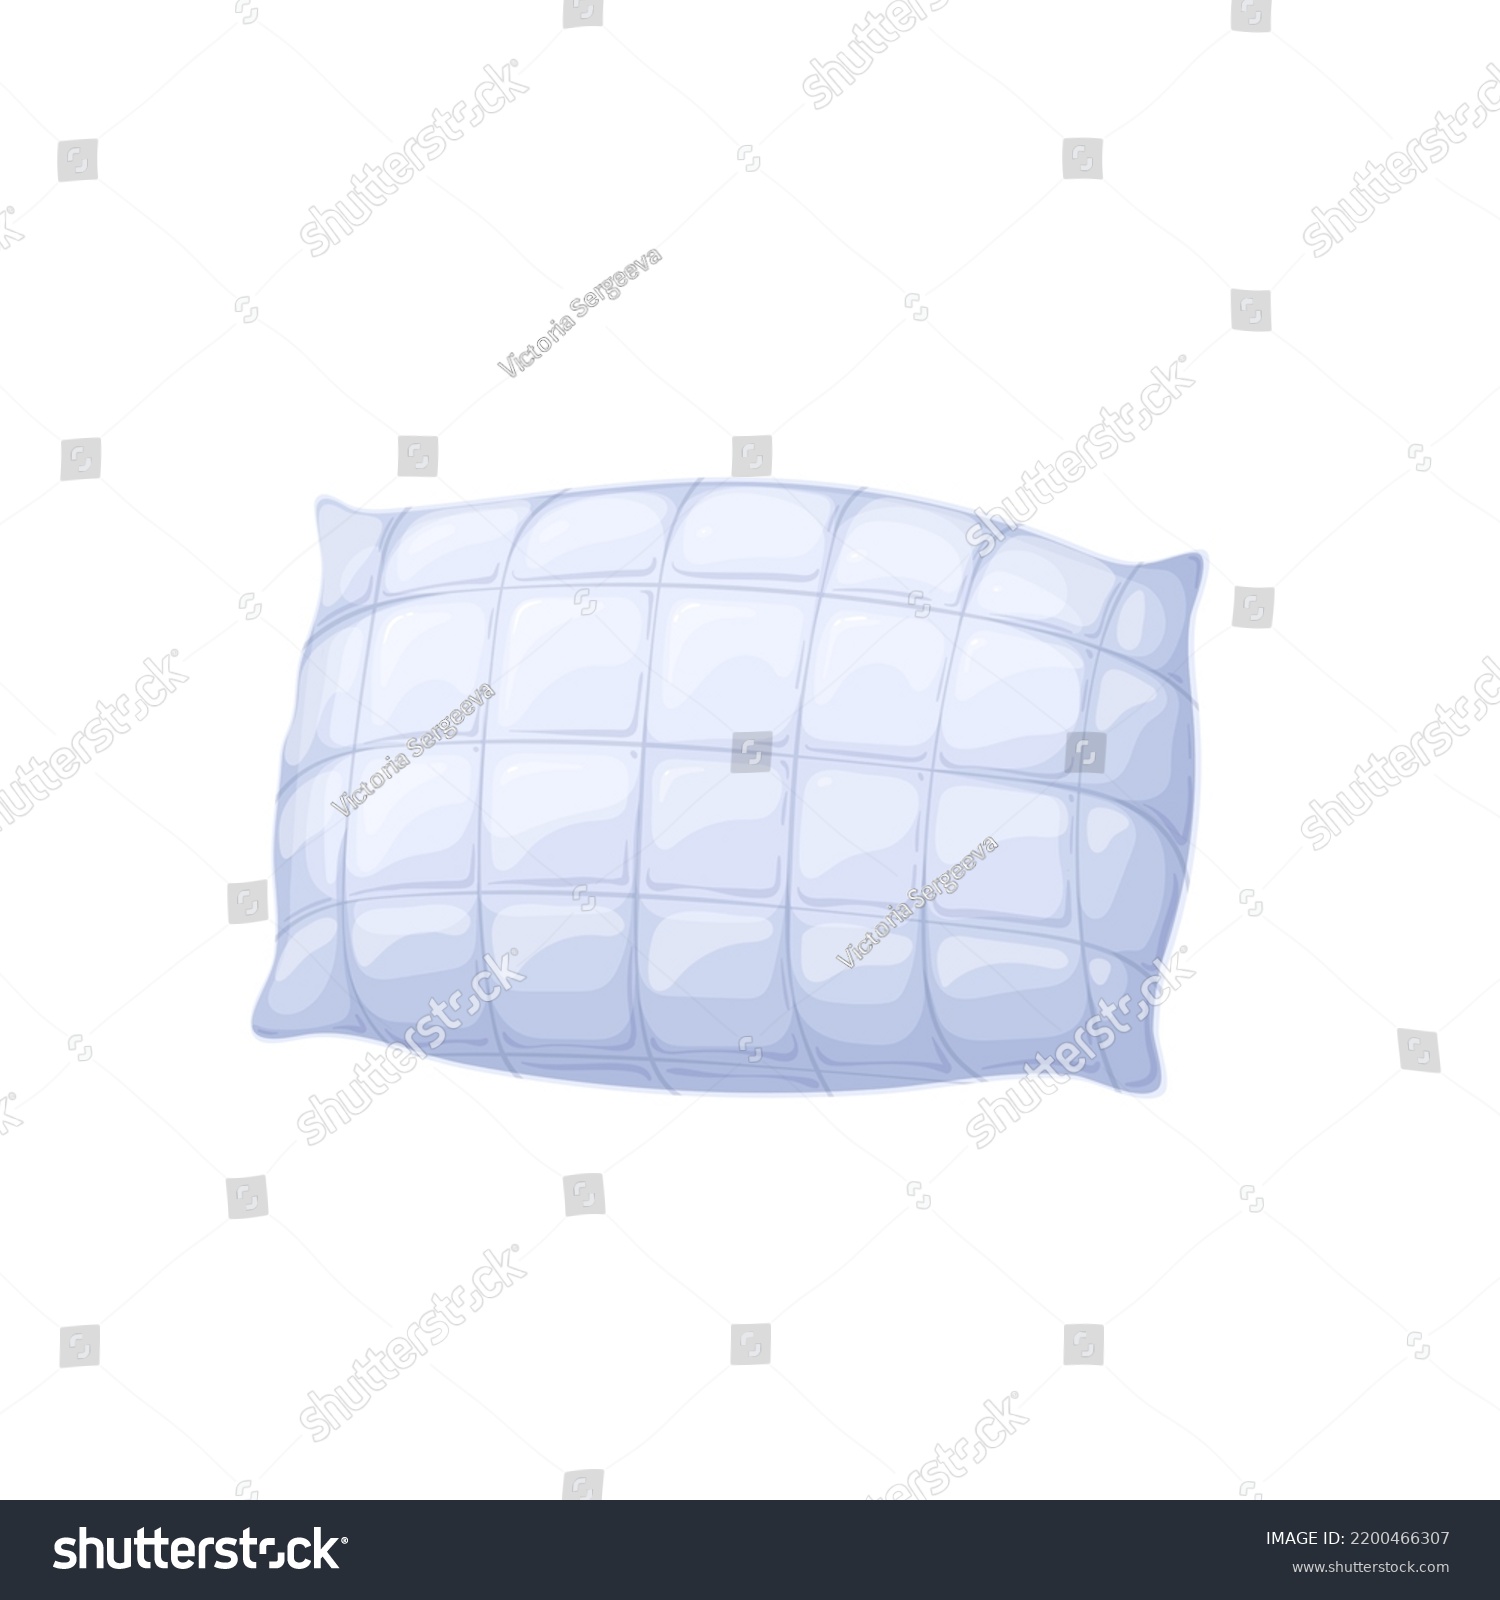 SVG of Pillow for healthy sleep and relax in bed vector illustration. Cartoon isolated white soft cushion with square decorative pattern on cotton textile, top view of fluffy bedroom furniture decoration svg